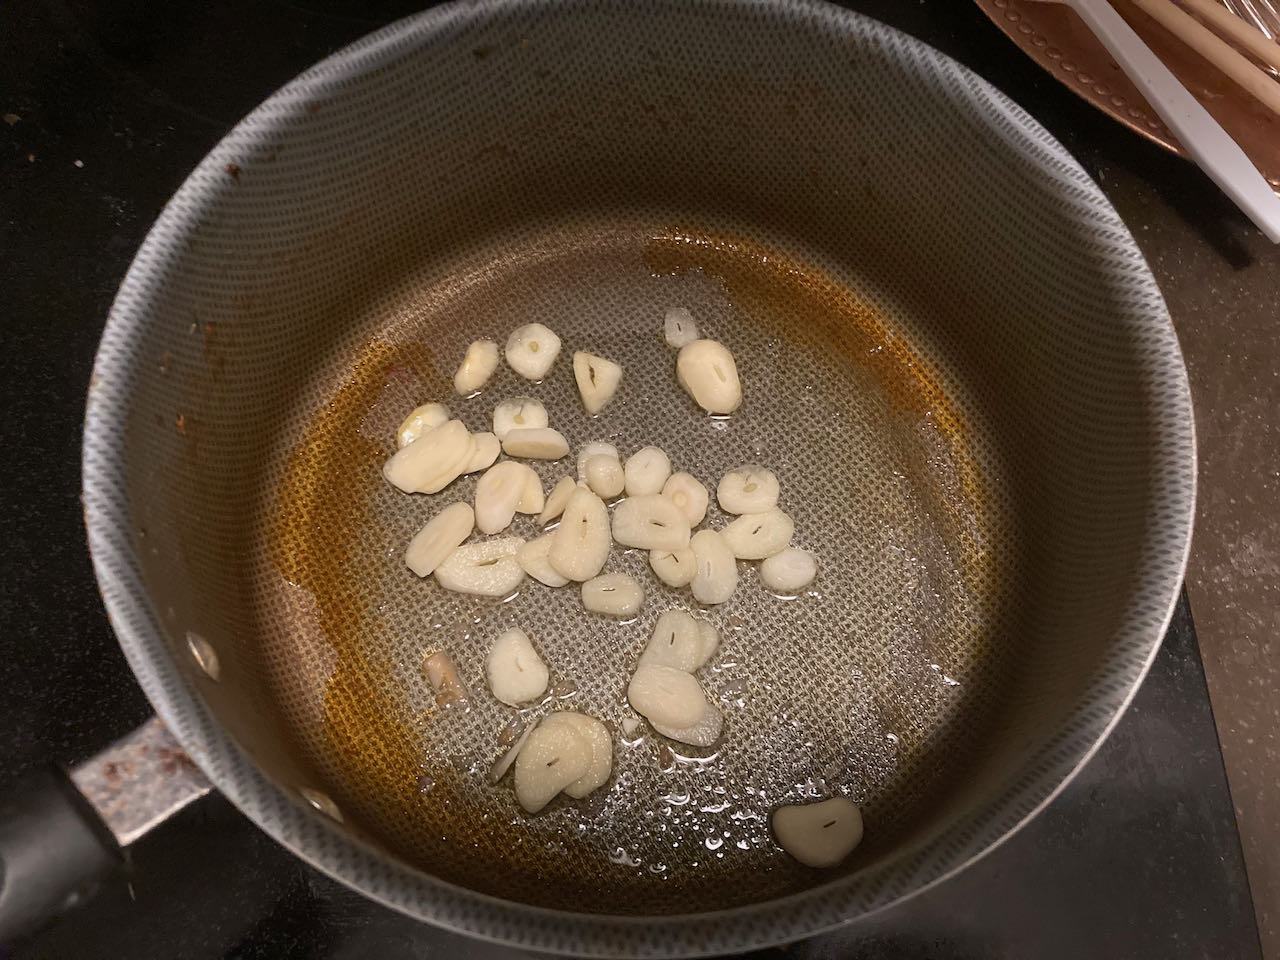 Sliced garlic and oil inside a cooking pot, which is on top of electric hot plate